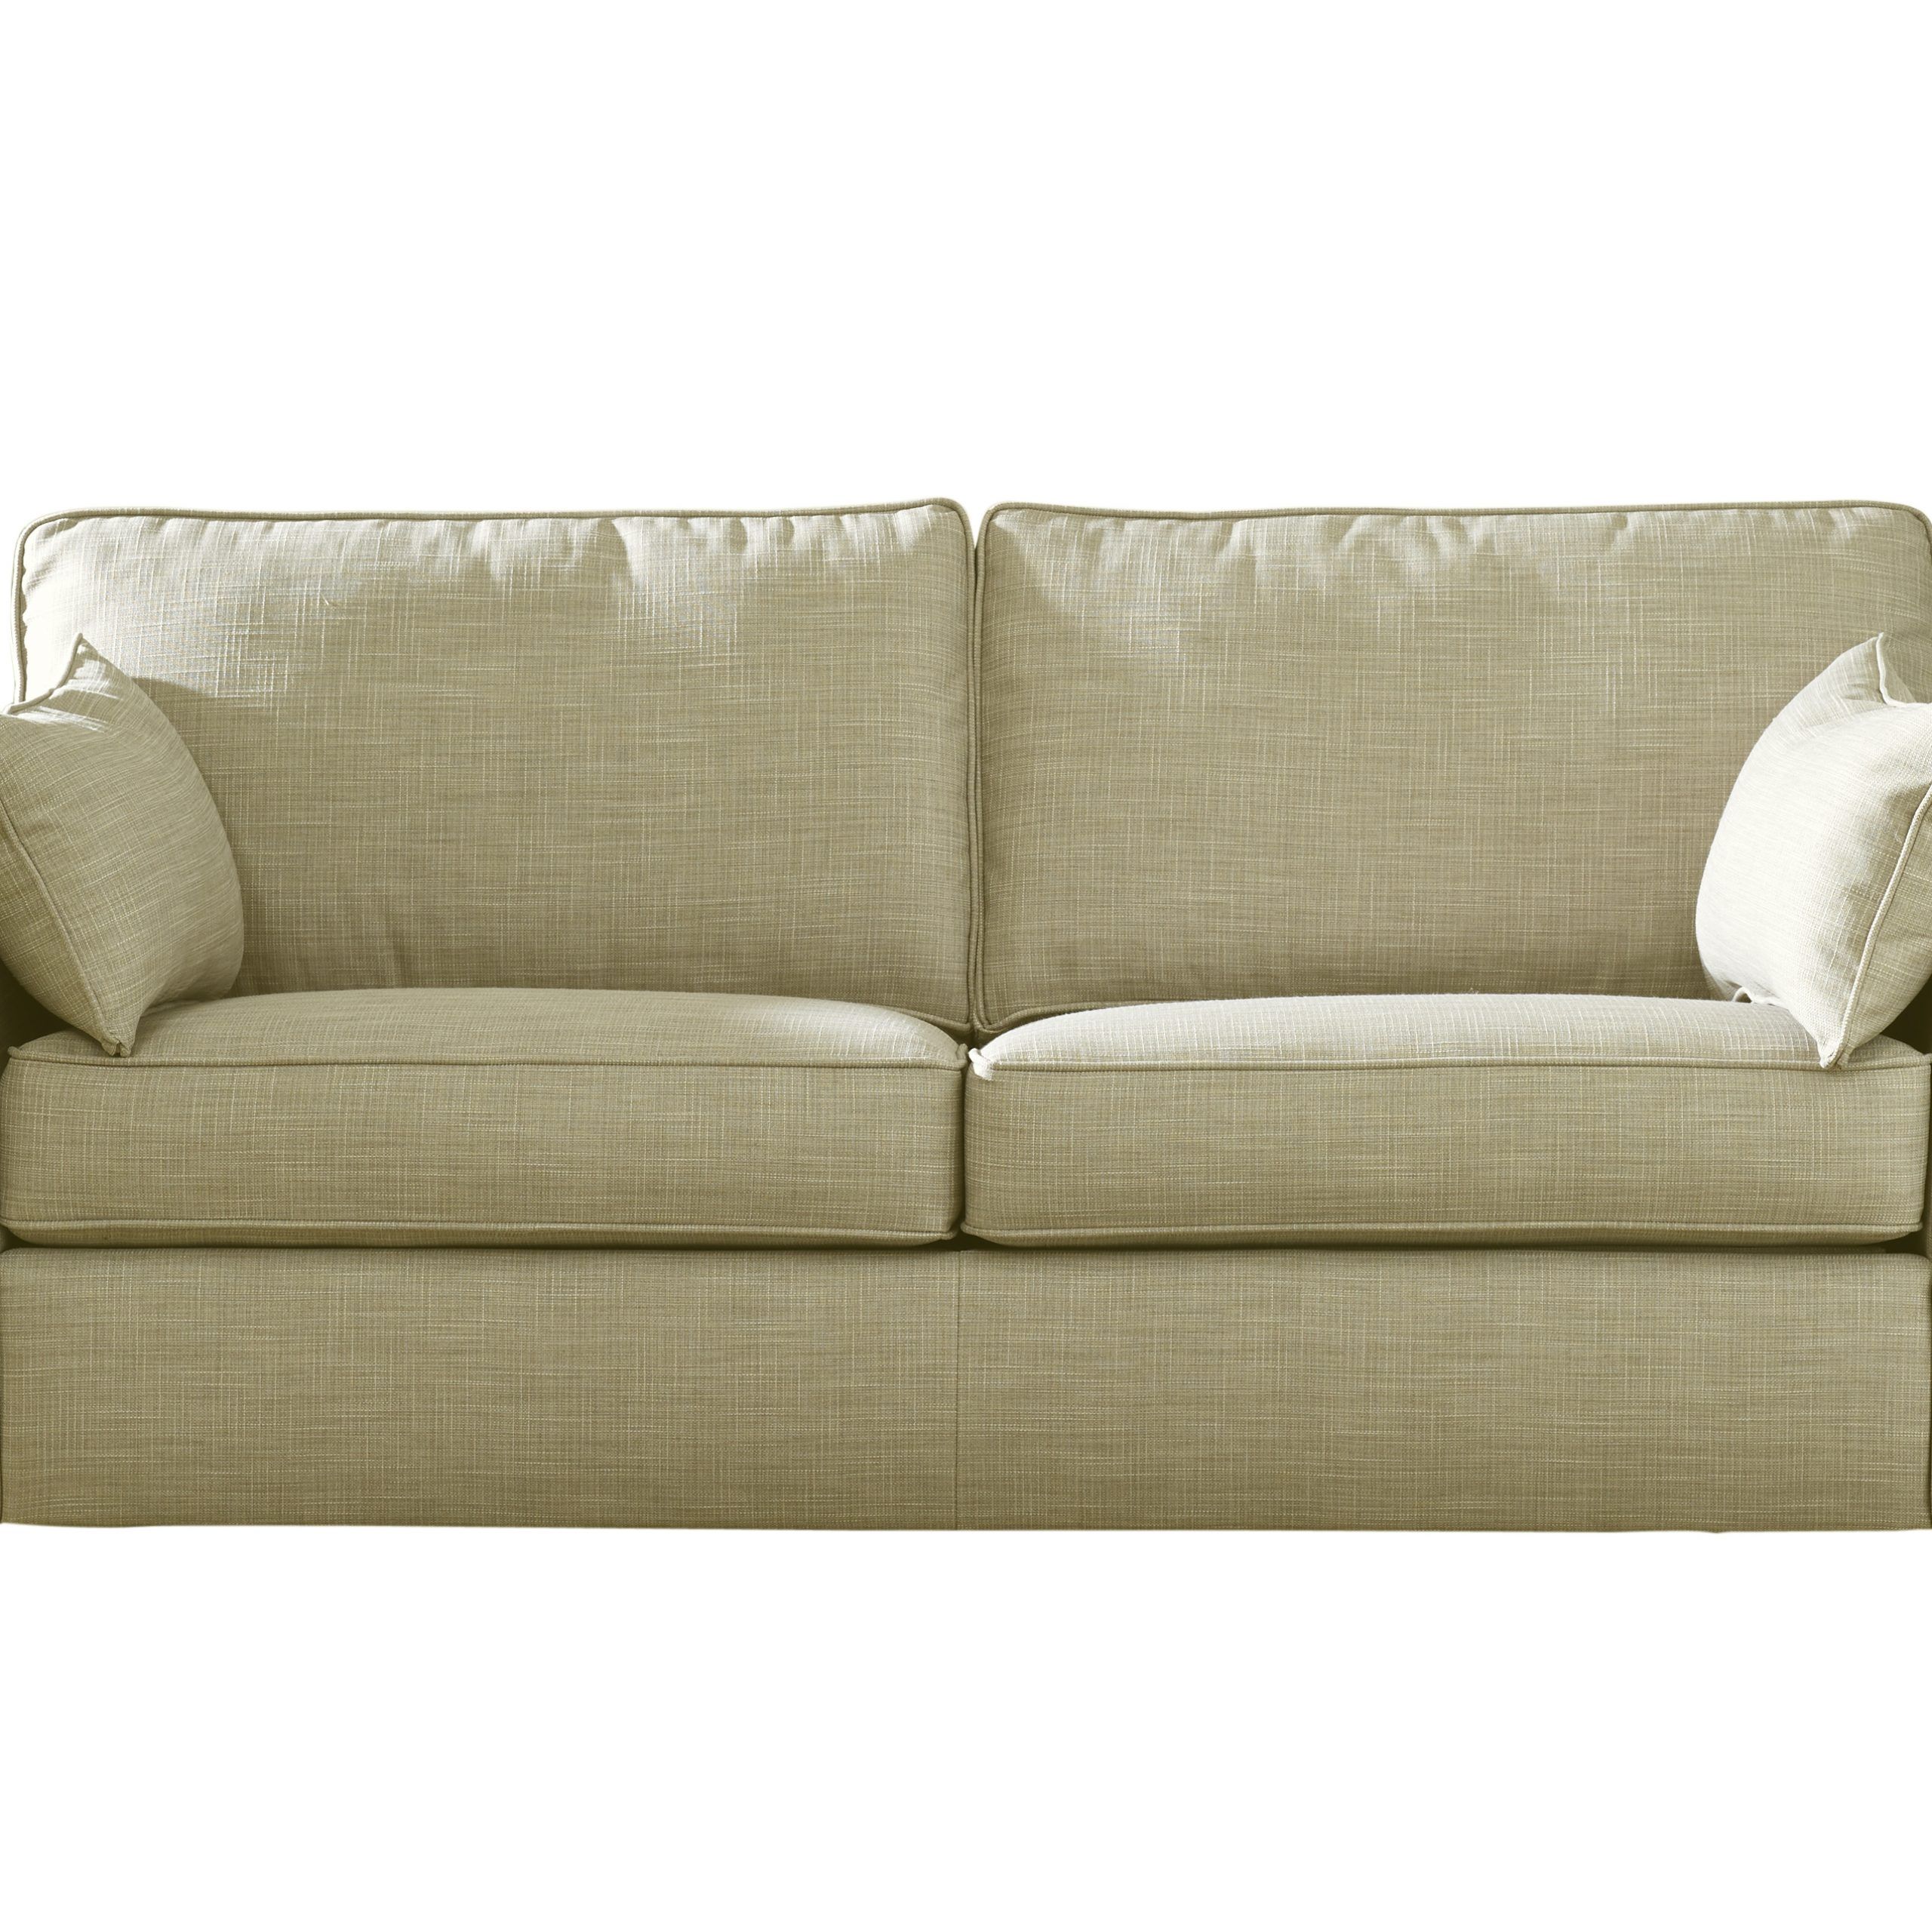 Montana Sofa Bed – Comfort And Slouch With Regard To Montana Sofas (View 4 of 15)